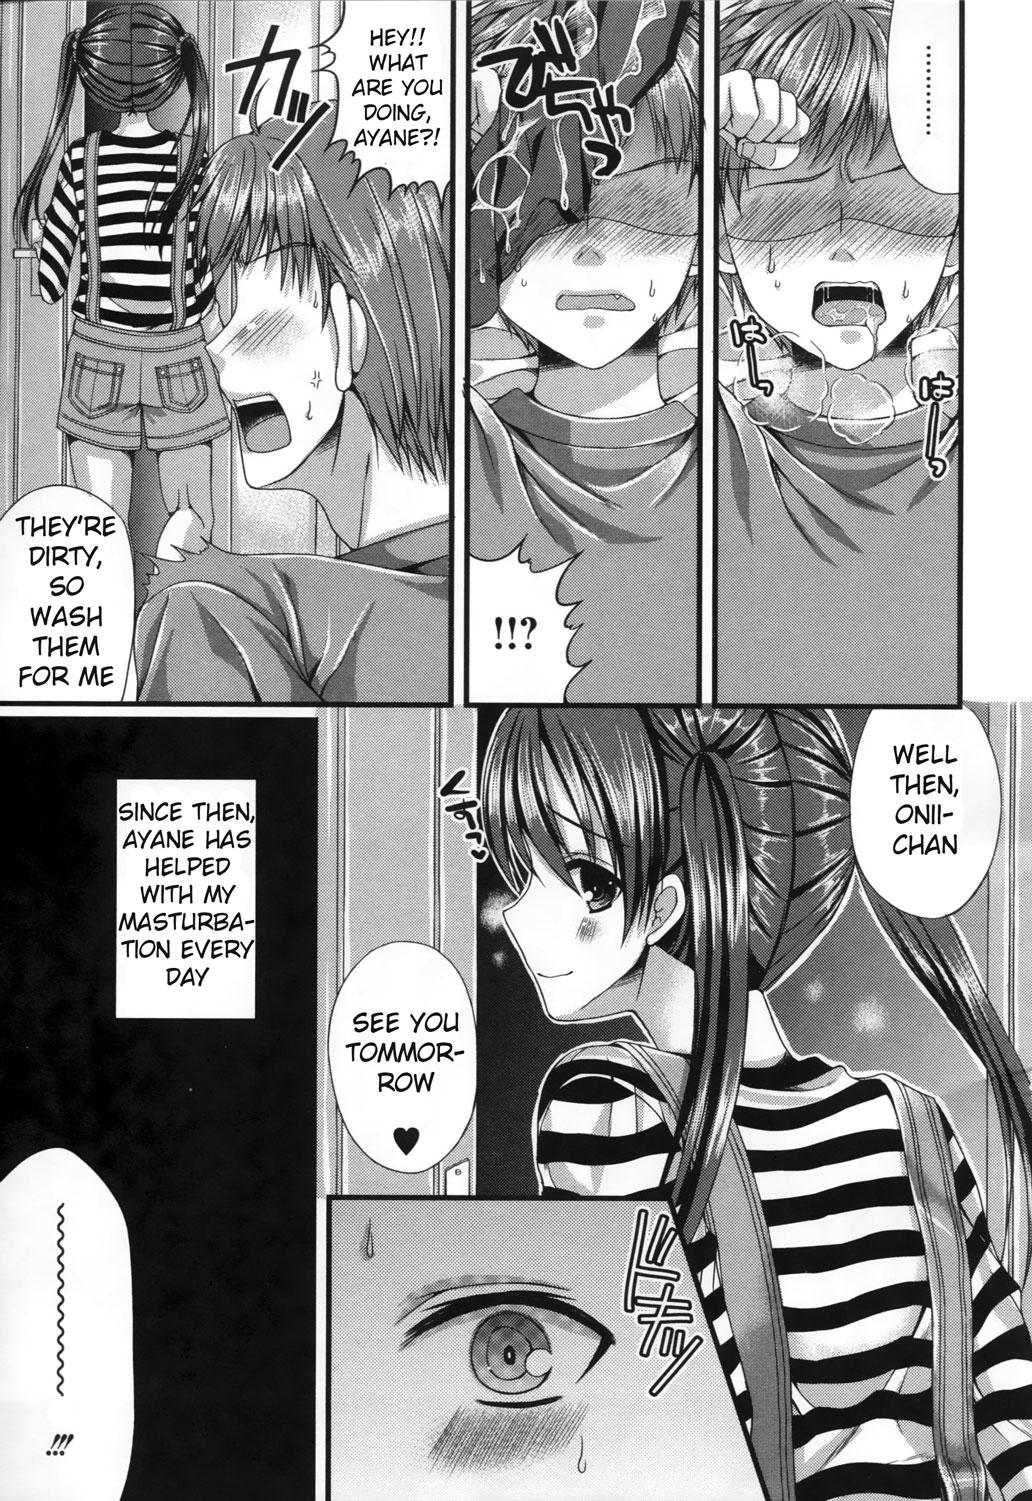 Best Blow Job Onii-chan training diary Amigos - Page 7